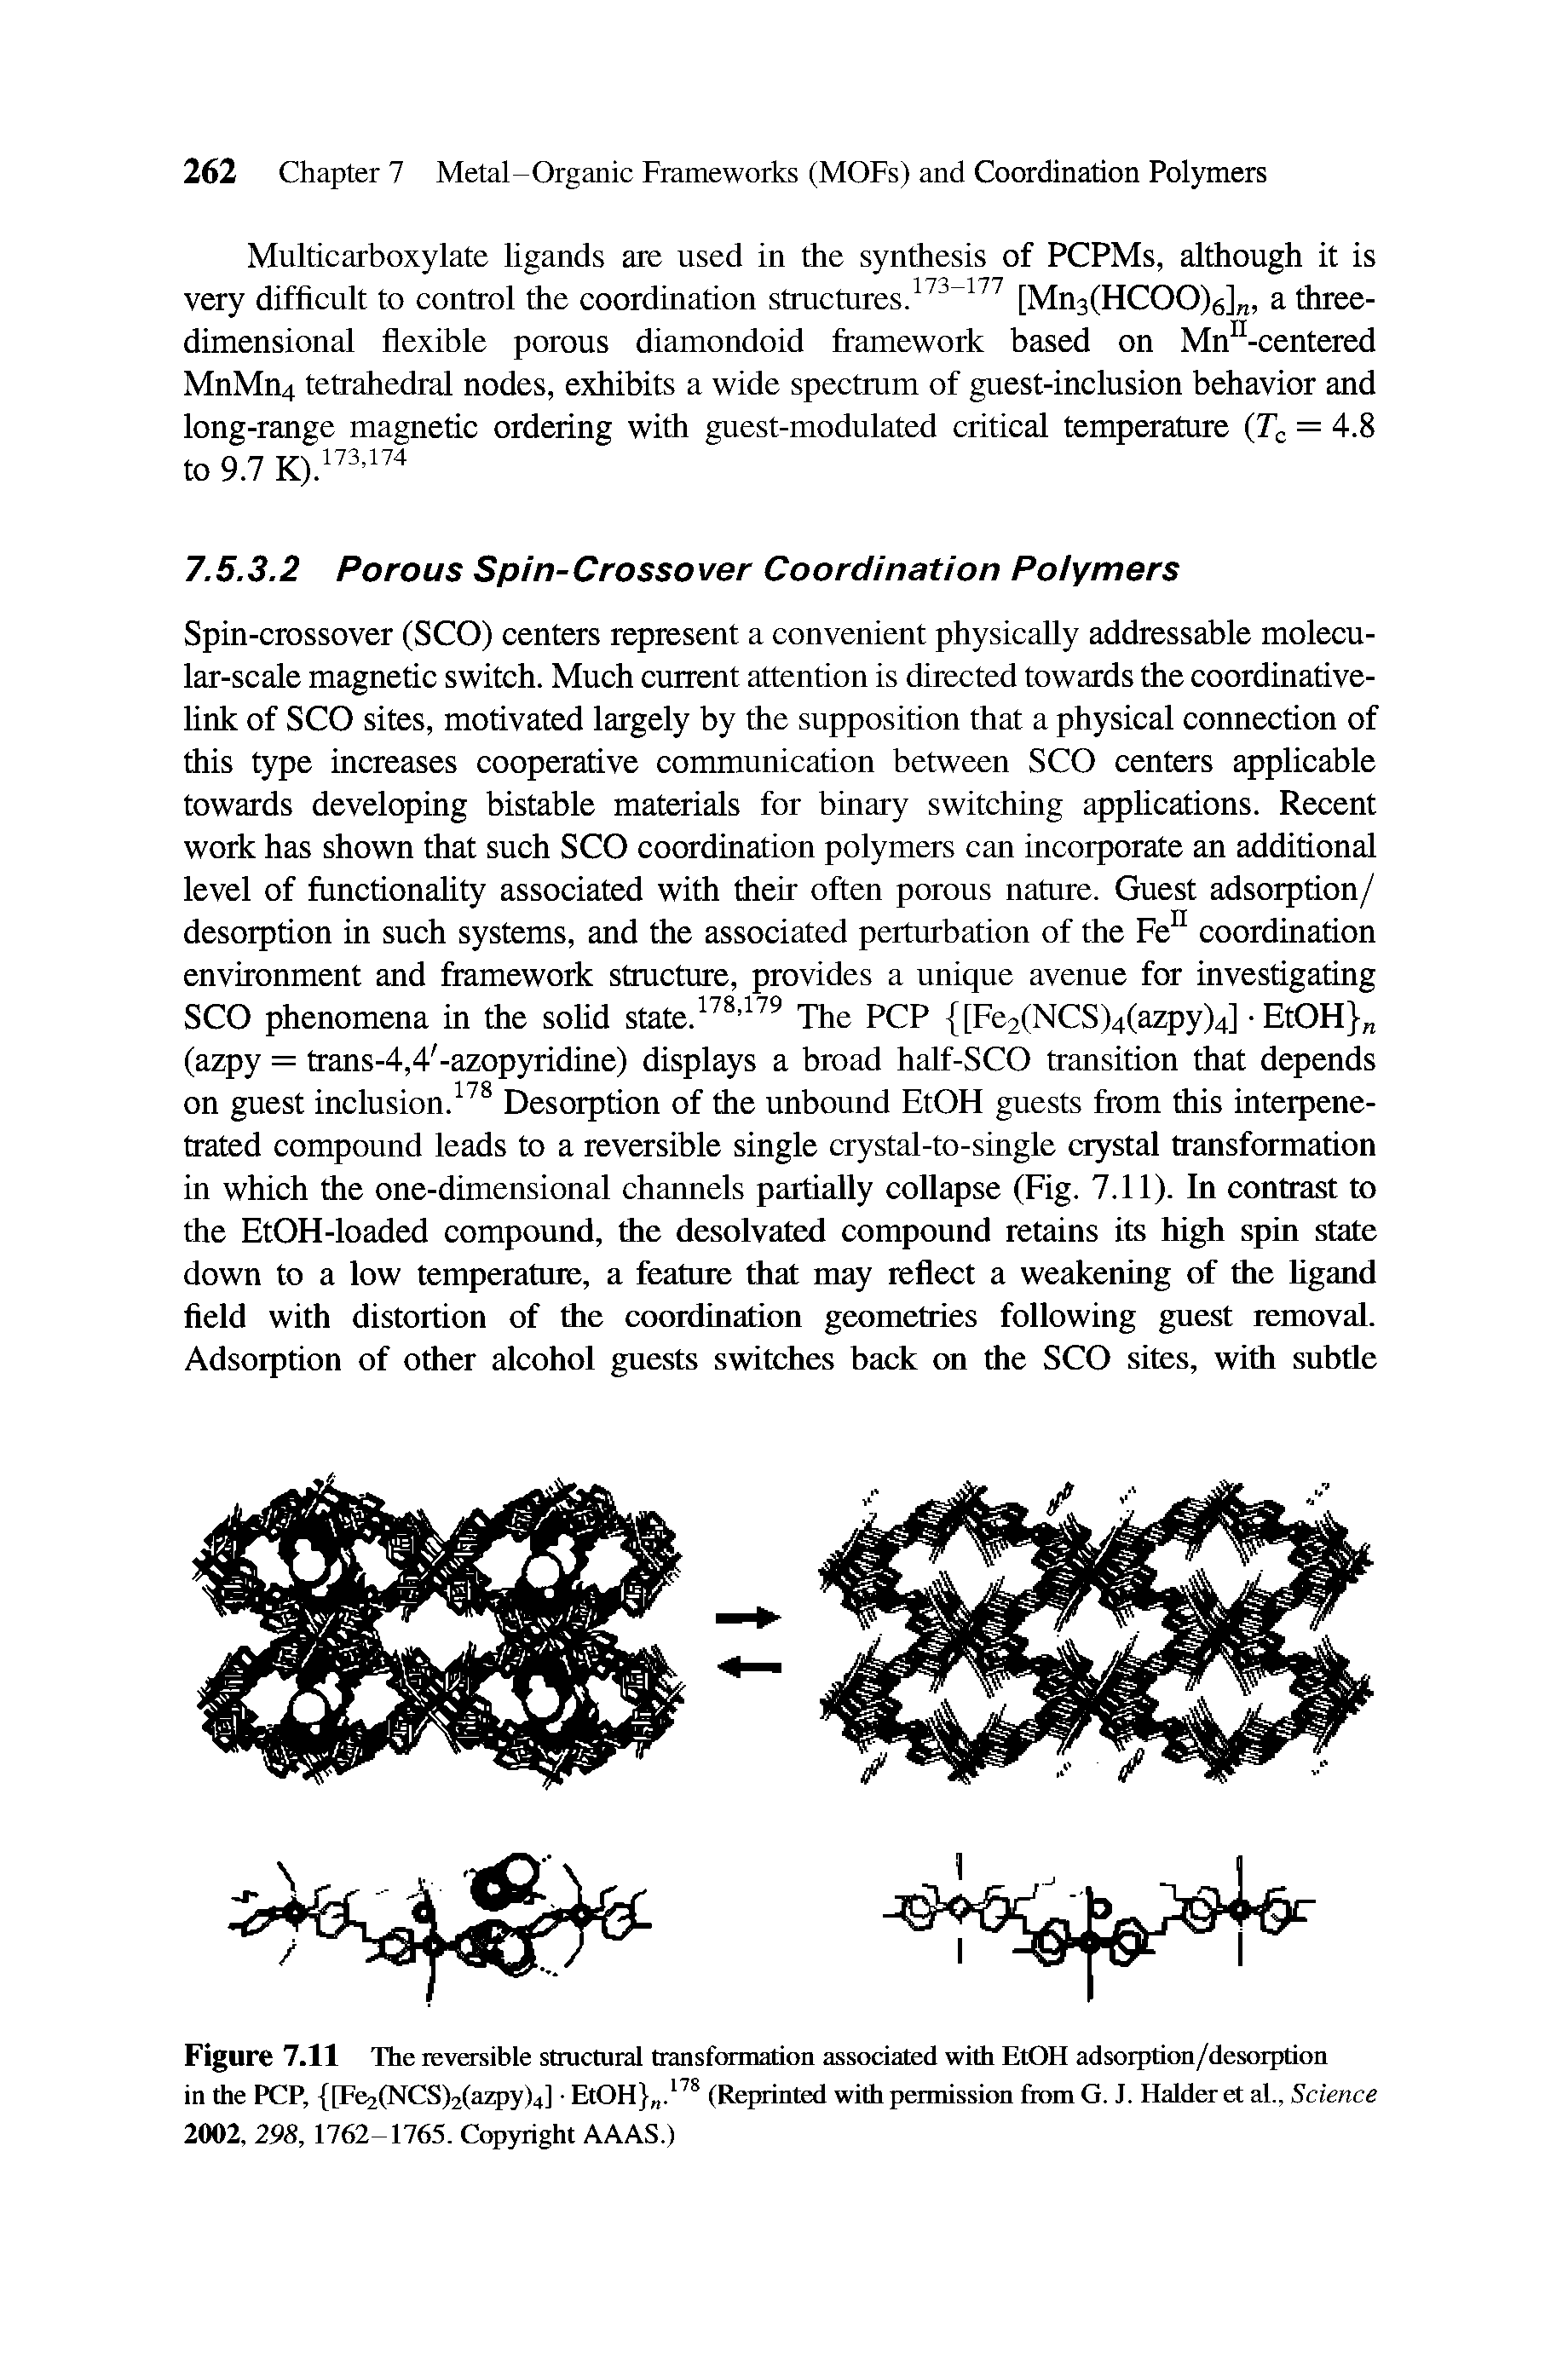 Figure 7.11 The reversible structural transformation associated with EtOH adsorption/desorption in the PCP, [Fe2(NCS)2(azpy)4] EtOH .178 (Reprinted with permission from G. J. Haider et al., Science 2002, 298, 1762-1765. Copyright AAAS.)...